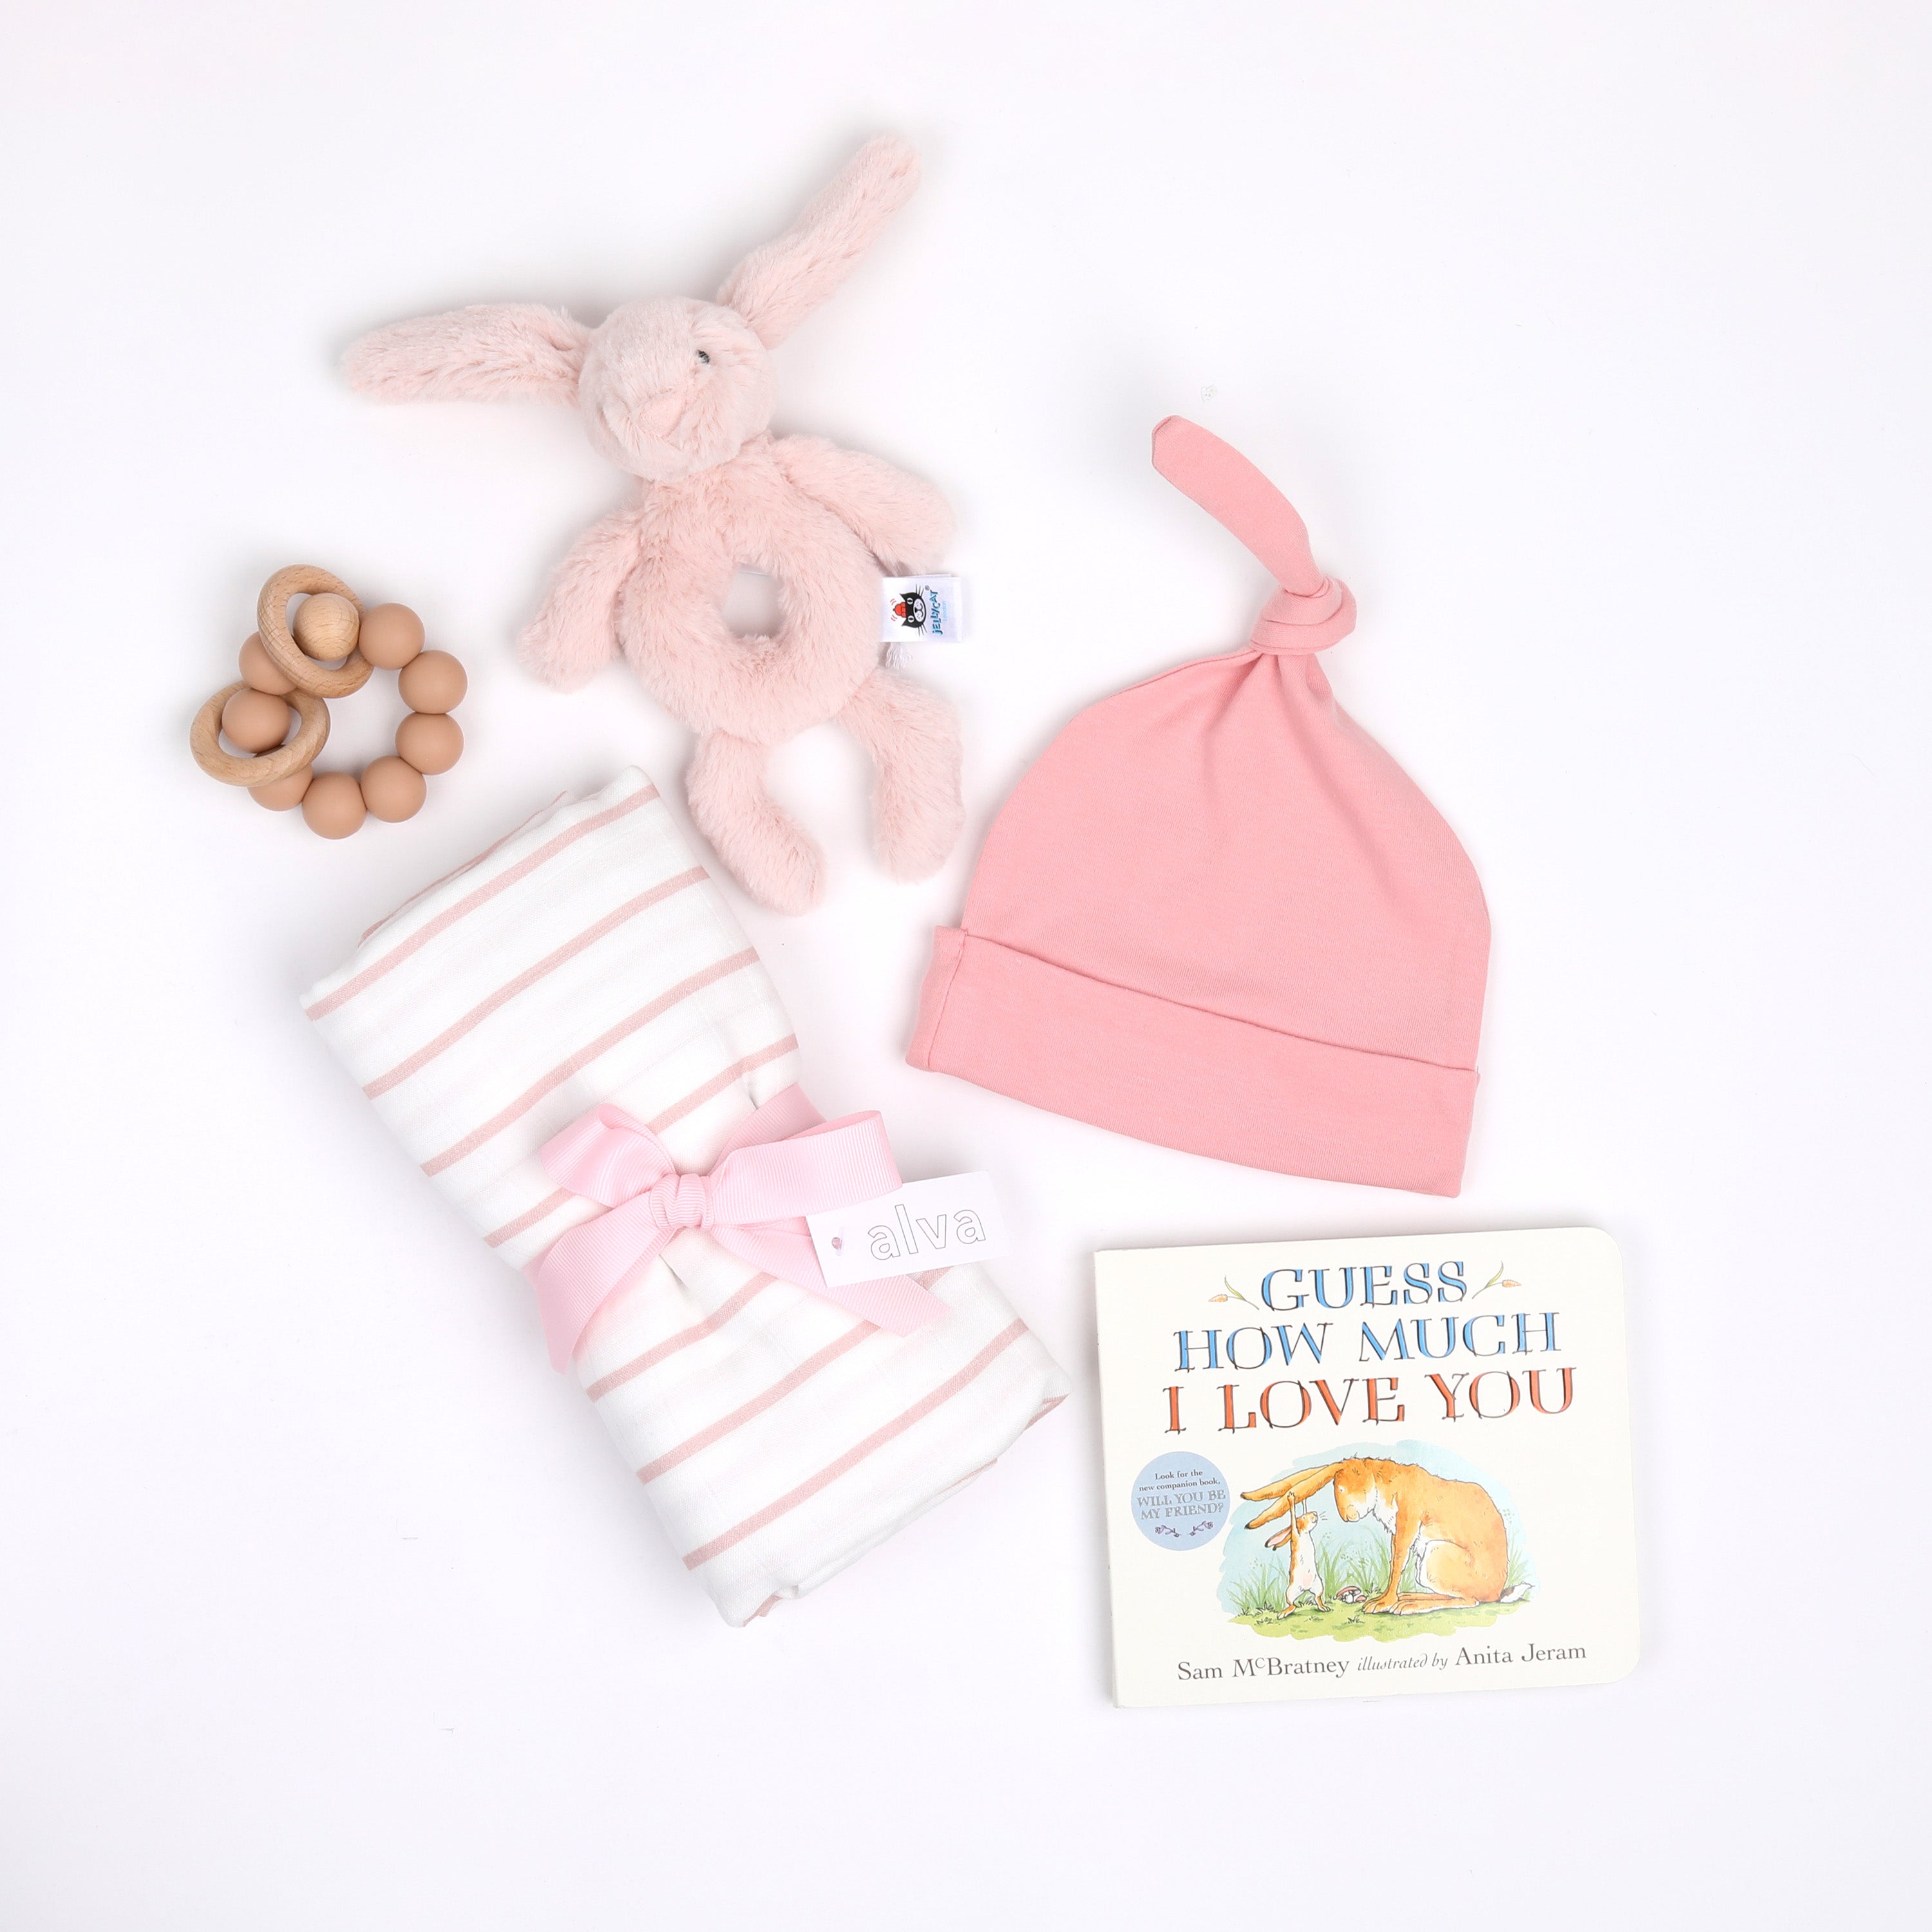 New Baby Girl products in a pile: teether, rattle, swaddle, hat, and book